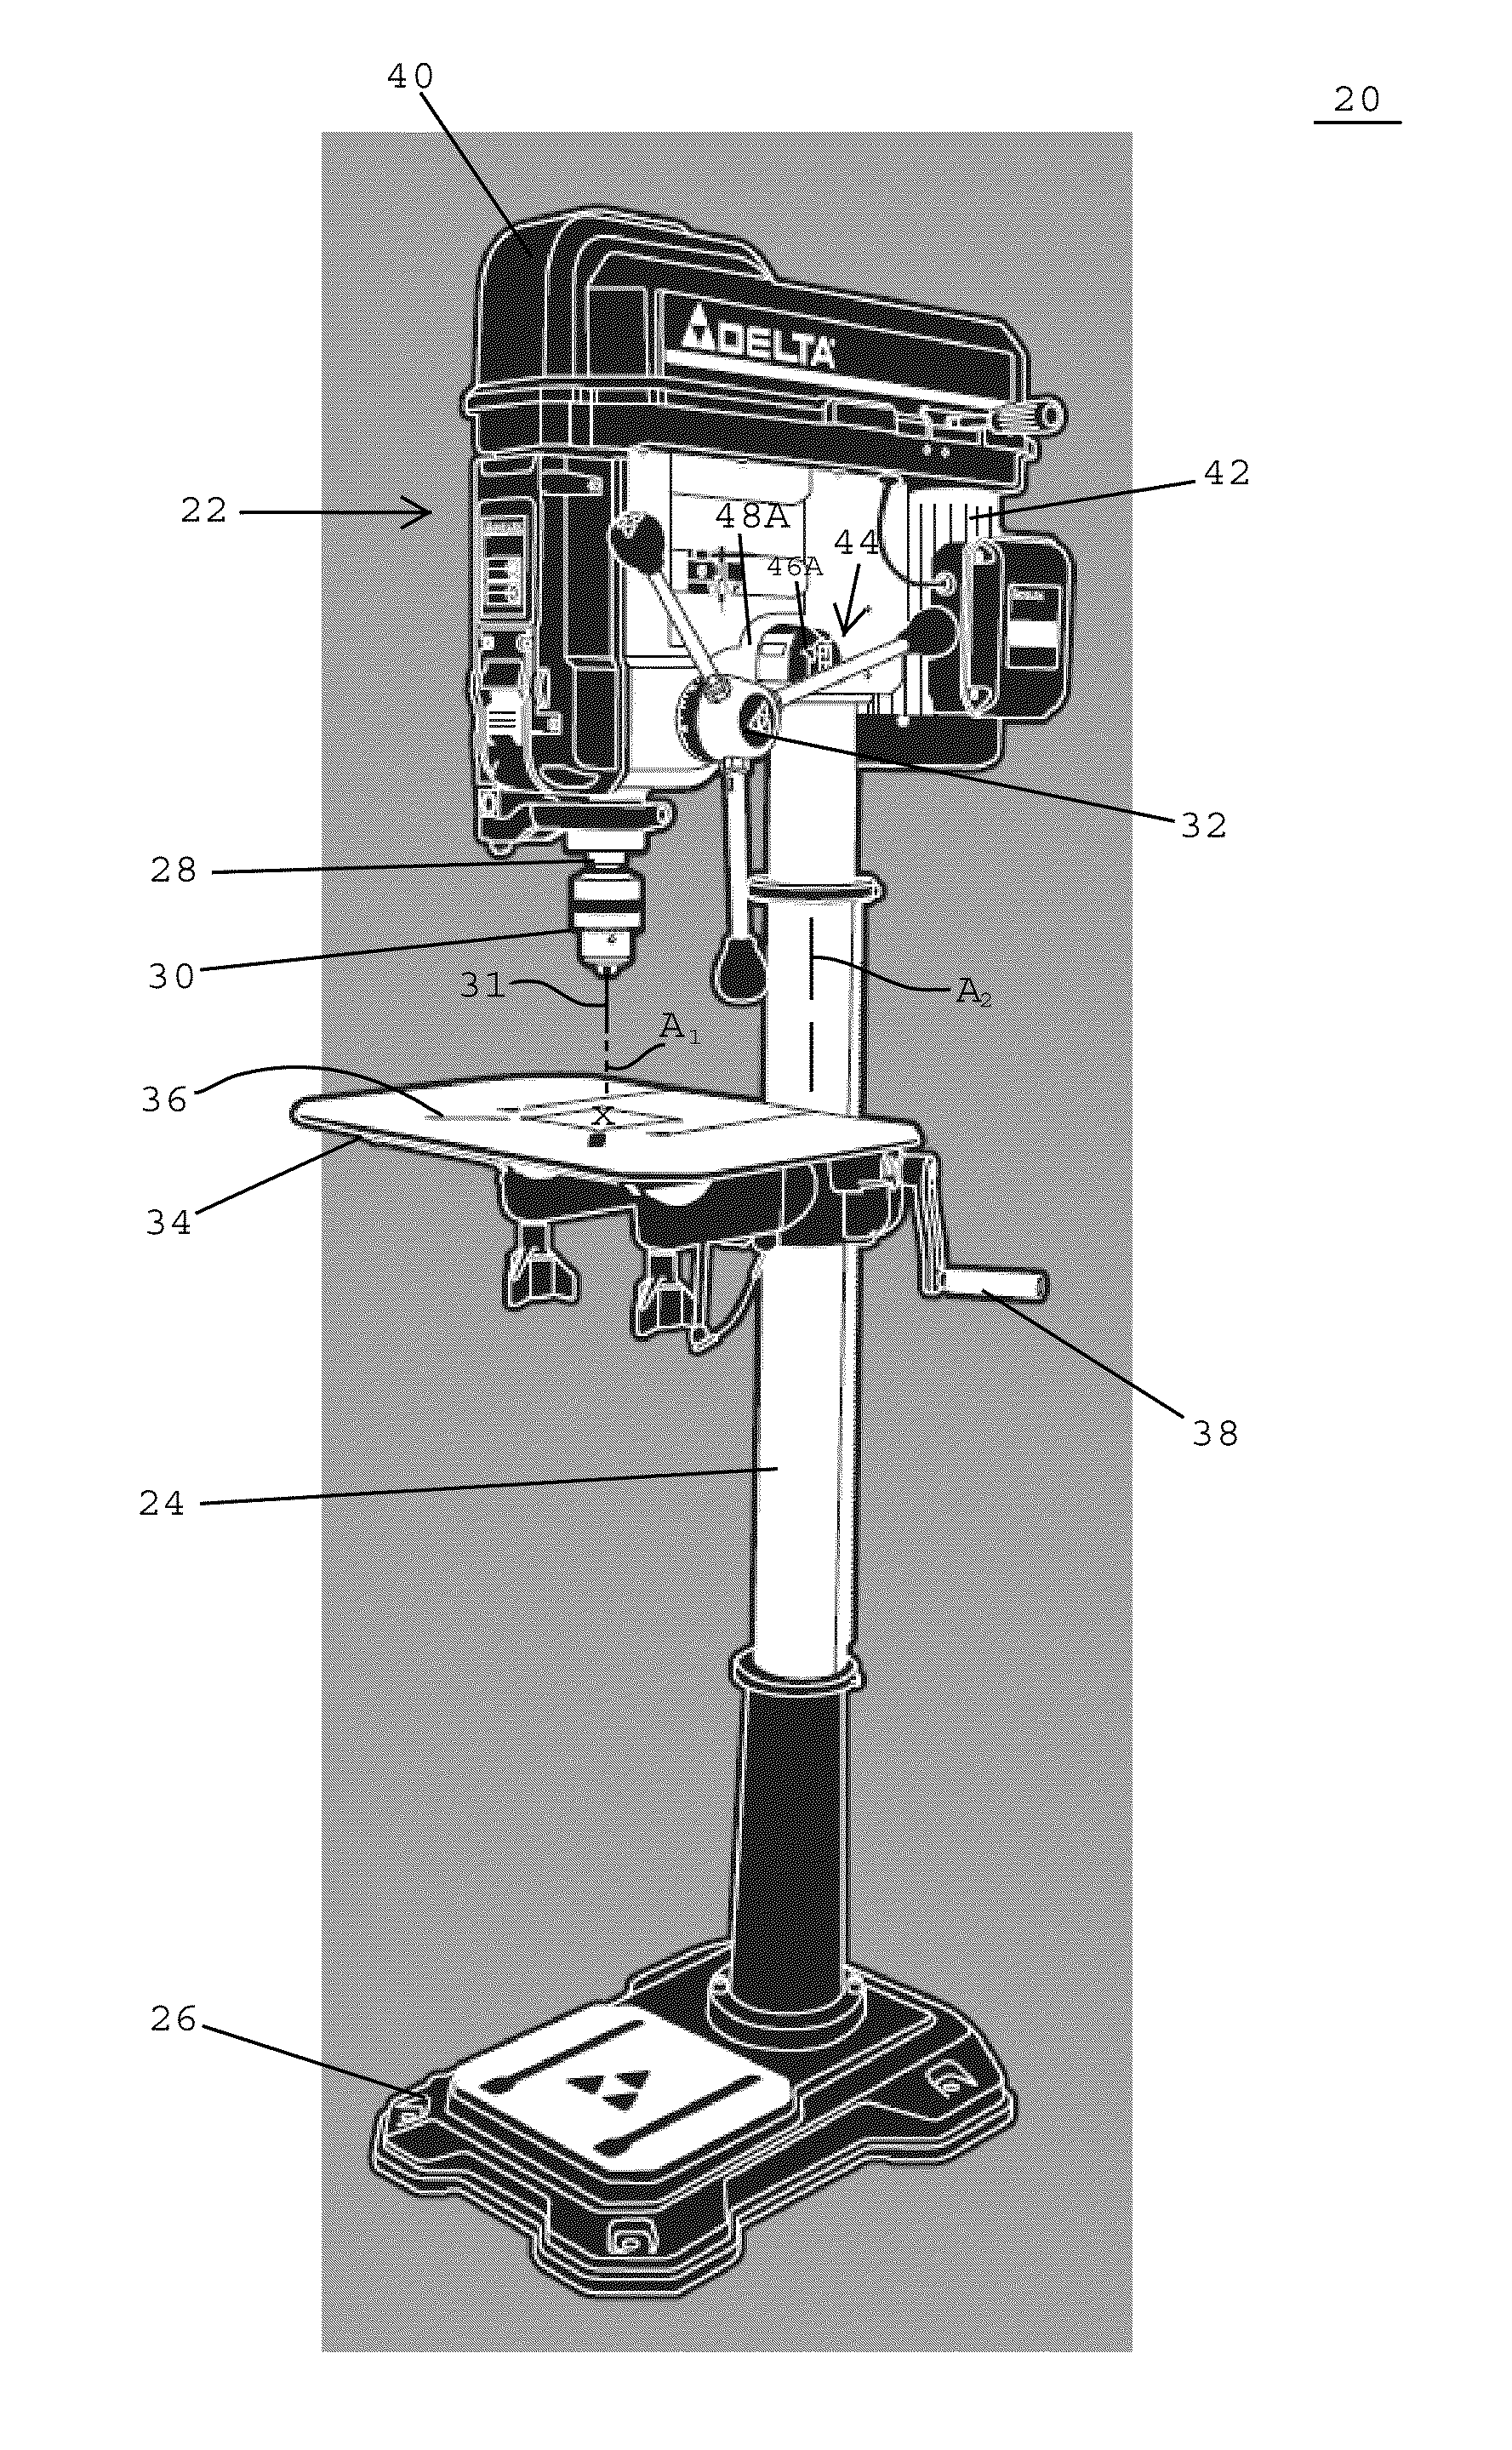 Drill presses having laser alignment systems and methods therefor